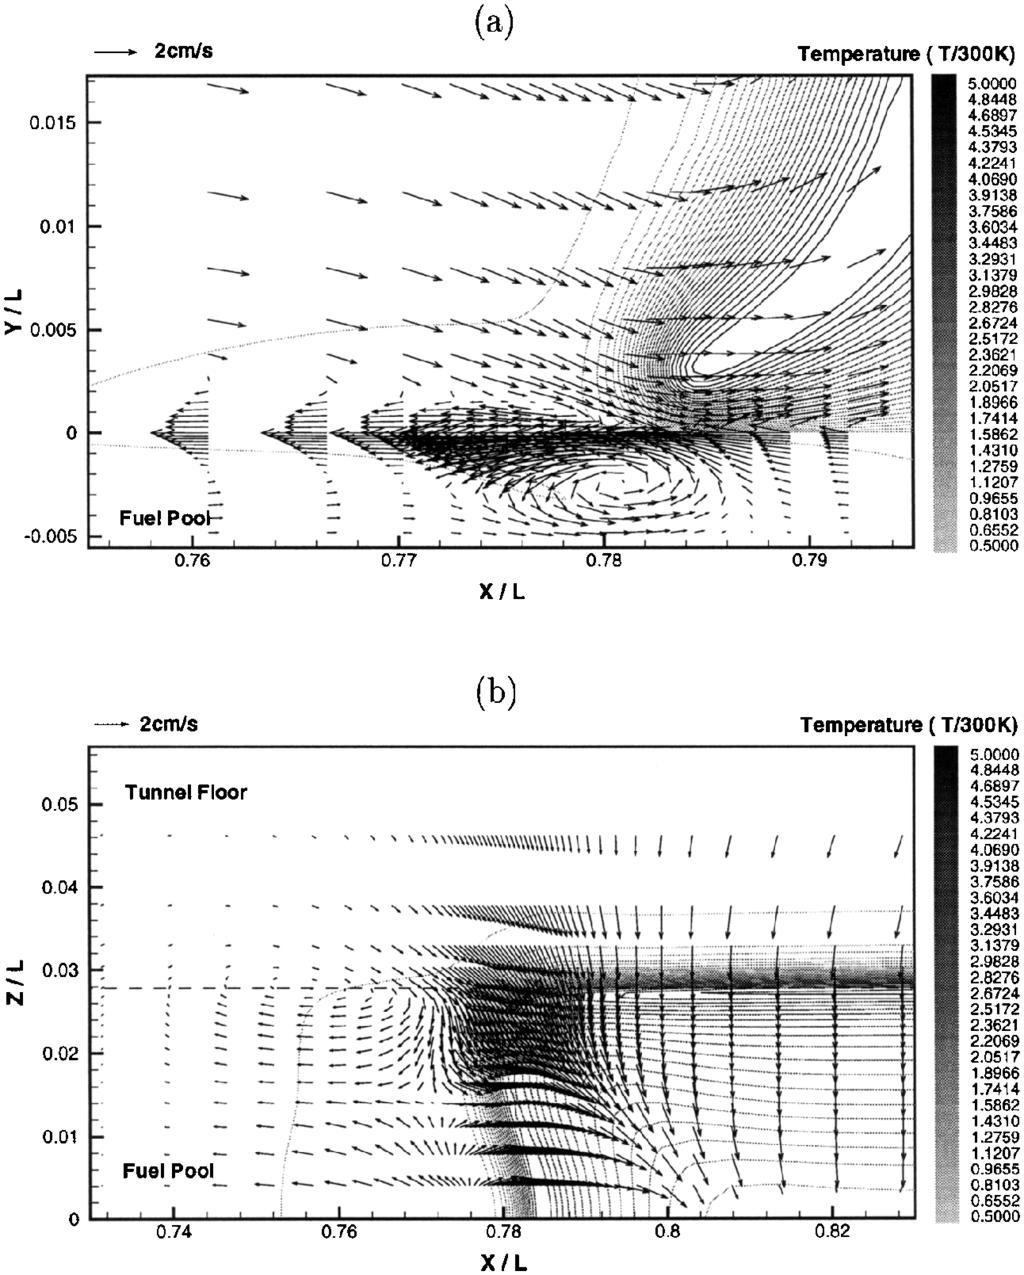 FLAME STRUCTURES OVER LIQUID FUEL POOLS 2121 in Figure 3b. This pattern of double vortices in the gas phase was depicted in the experimental measurement by Konishi et al. (2000).